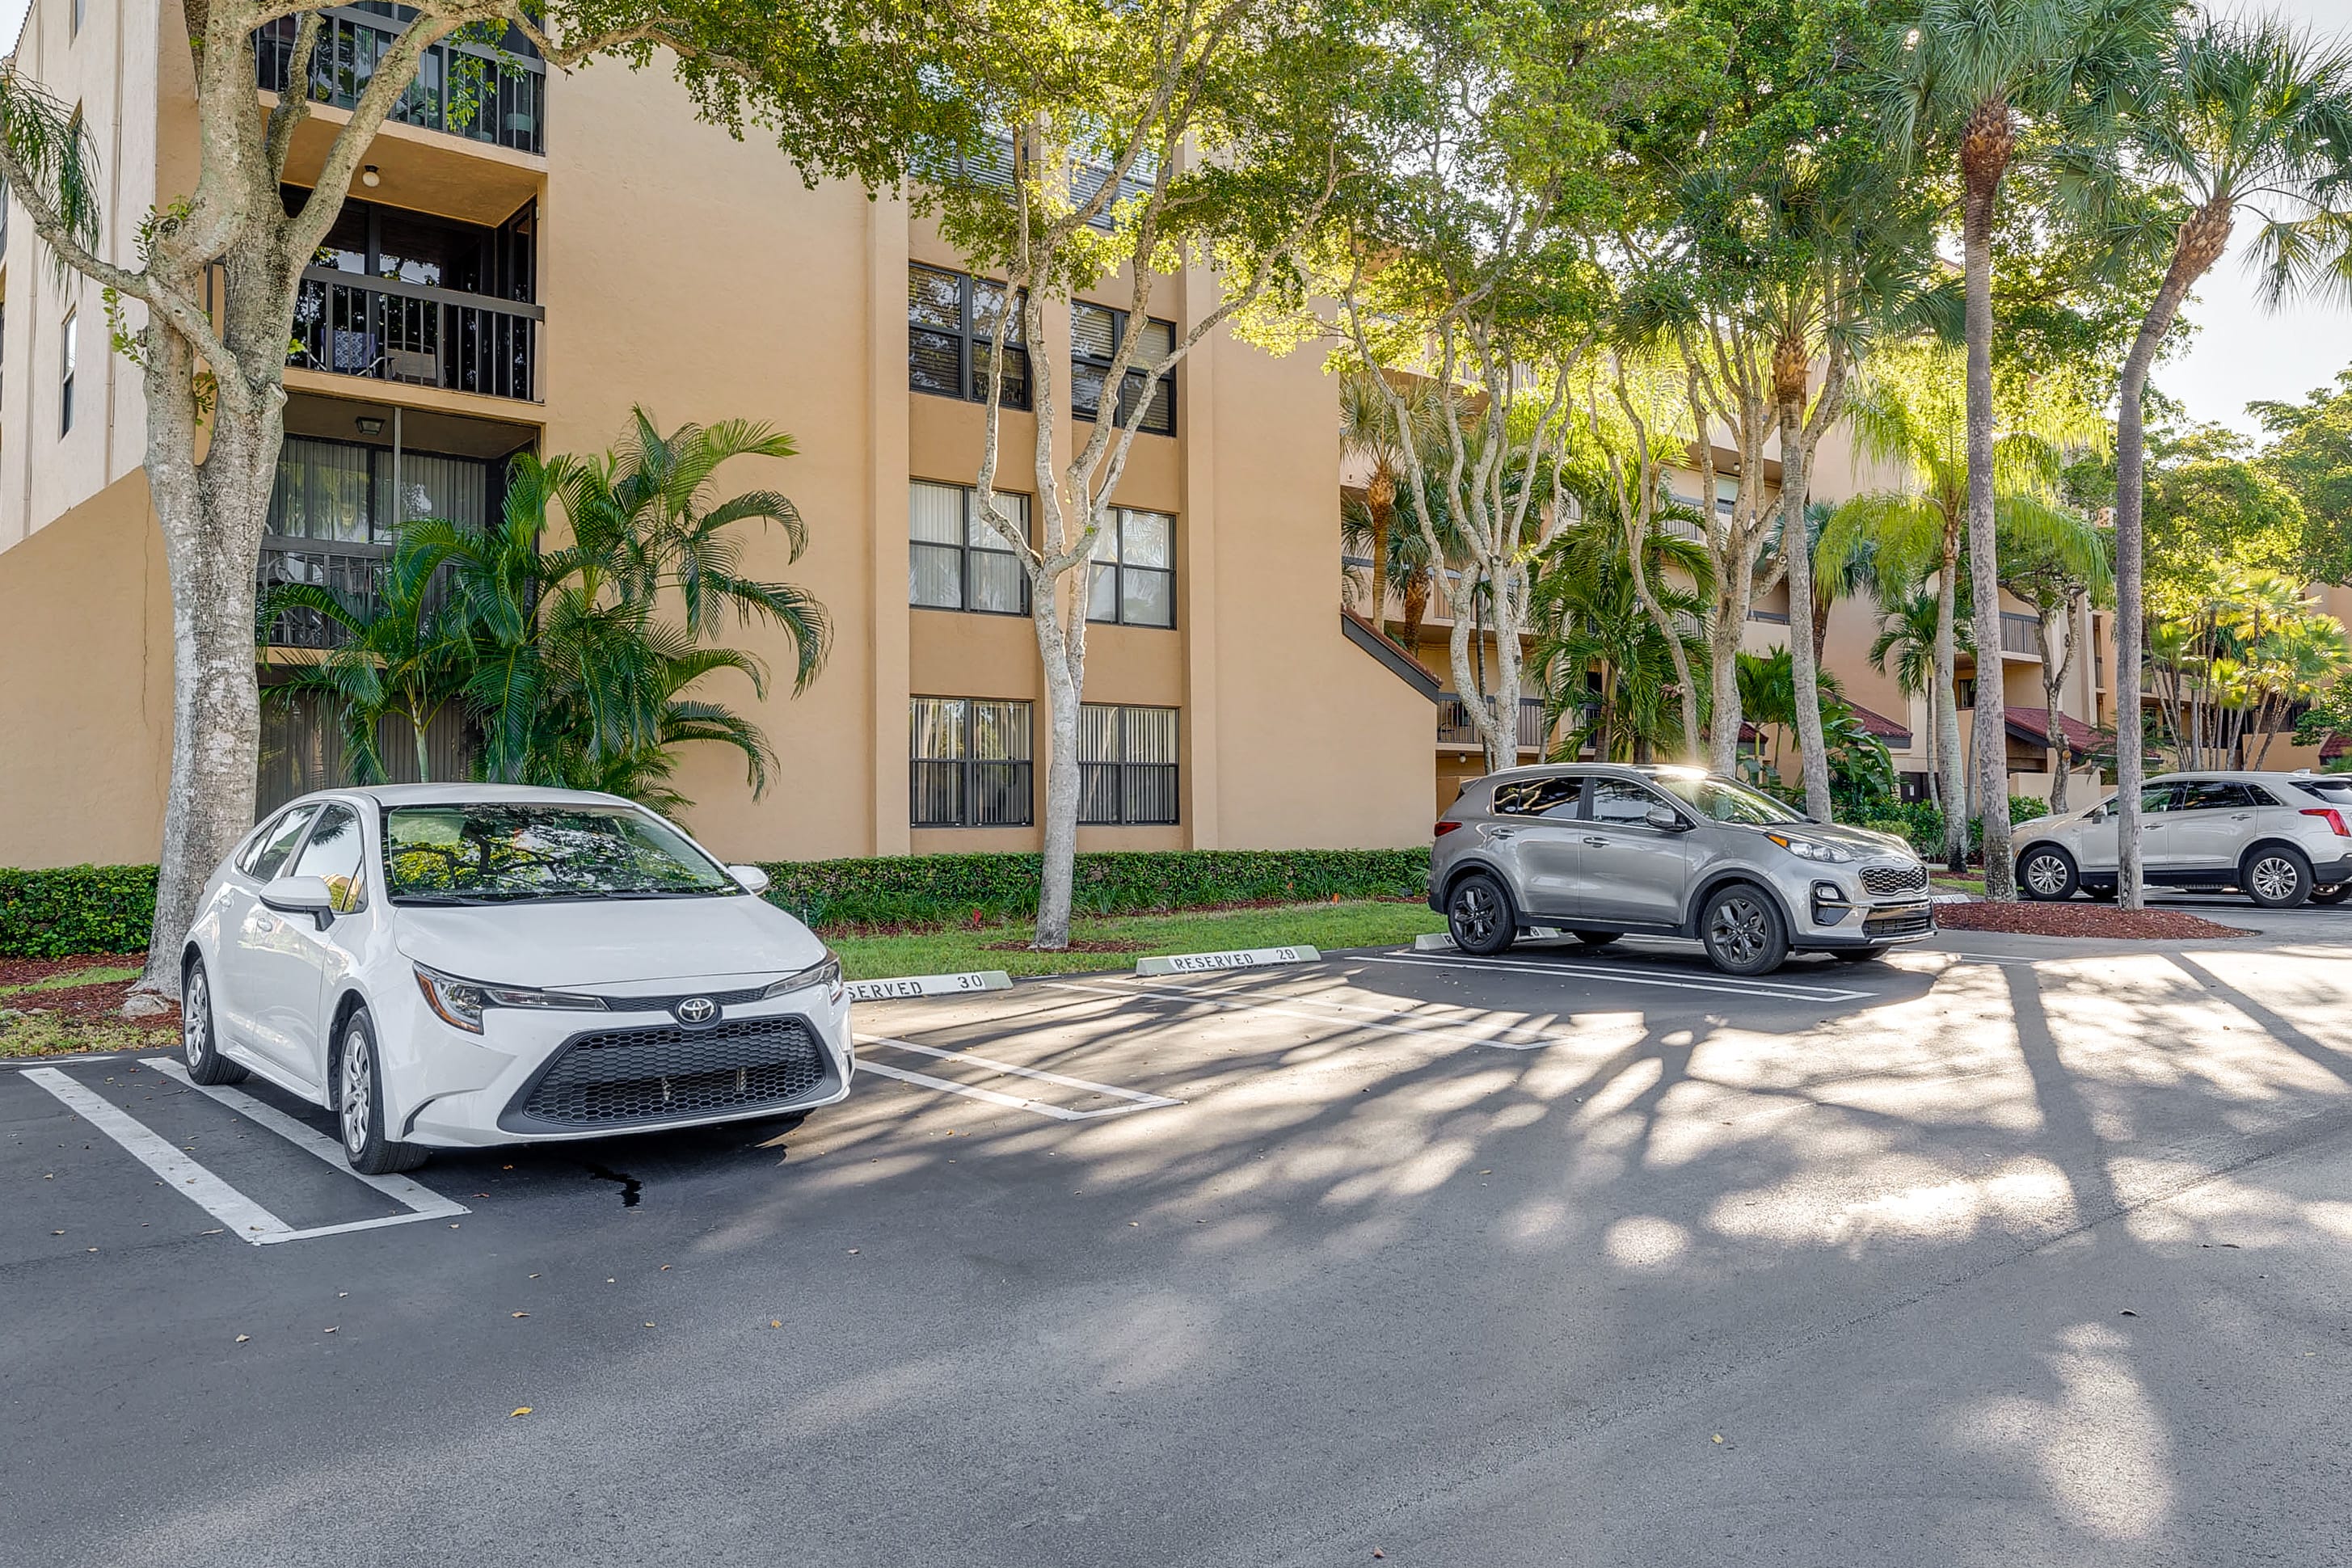 Condo Exterior | Parking | Covered Parking (1 Vehicle) | Free Street Parking